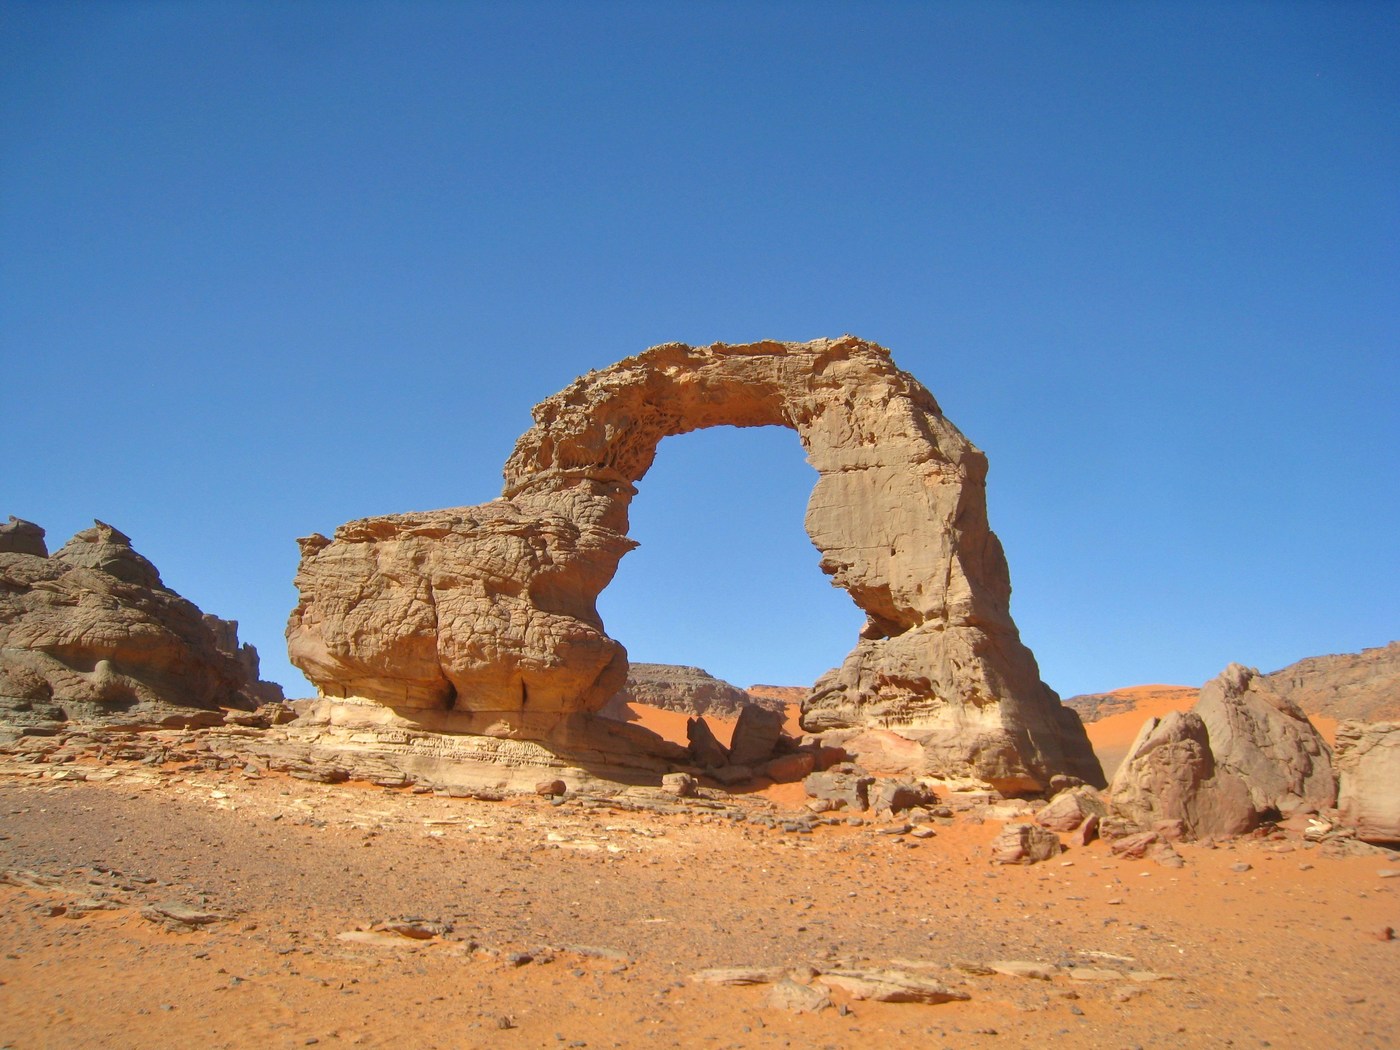 Picture taken in the Saharay, in the mountain plateau of Thadrat, in the south-east of Algeria